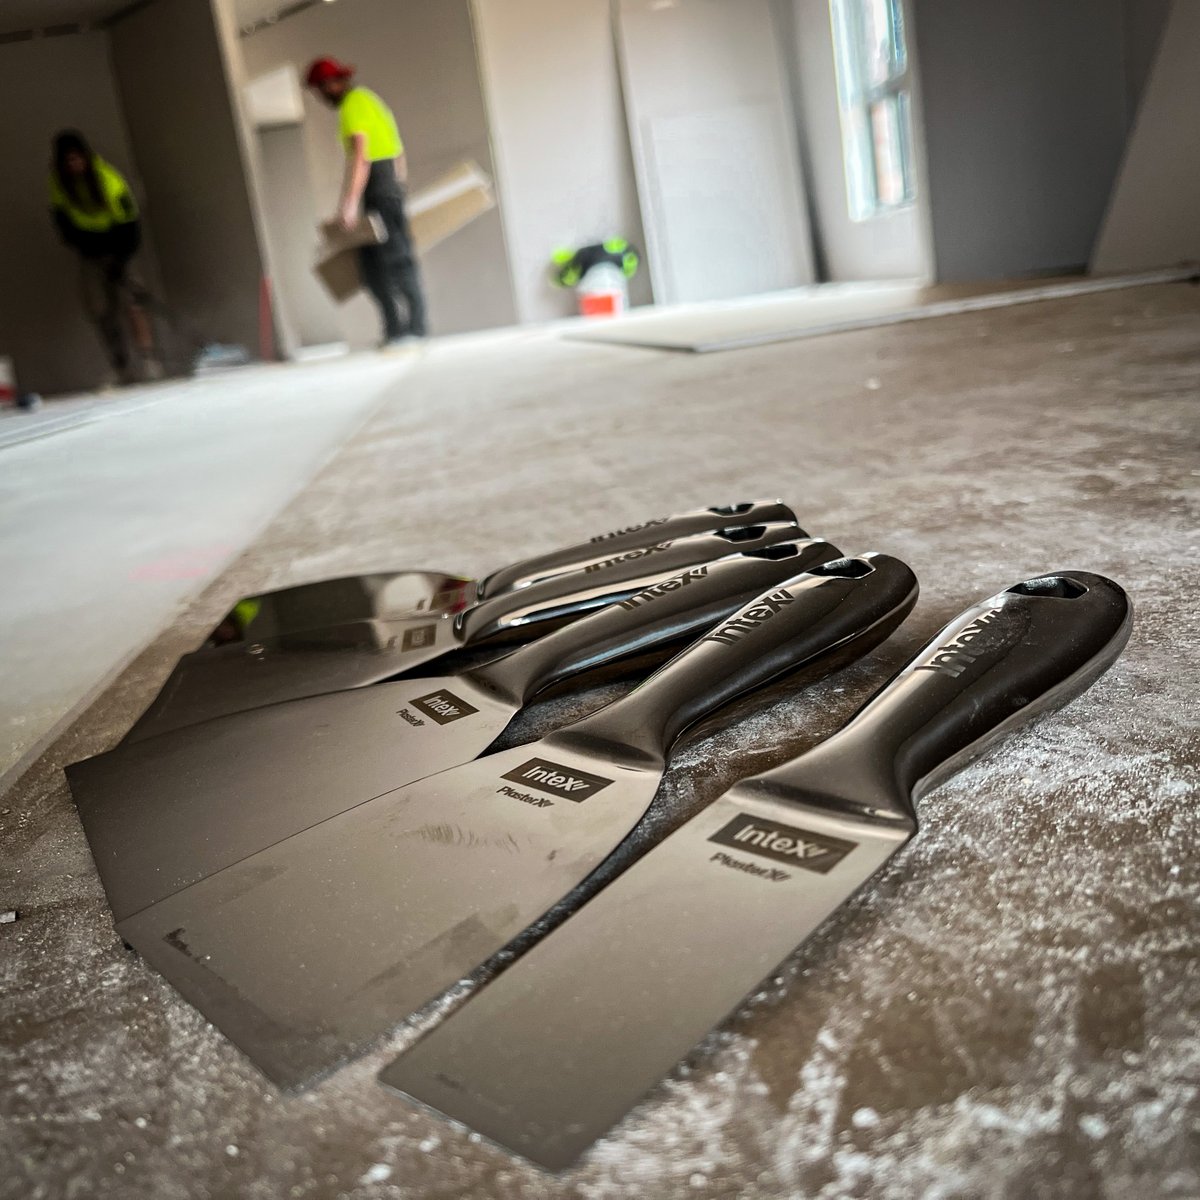 Who doesn't love a fully polished blade with controlled flexibility and strength! #workinstyle 🤩

#Intex1989 #builtTradeTuff #handtools #drywalltools #easytoclean #precise #perfectionguaranteed #qualityassured #antisliphandle